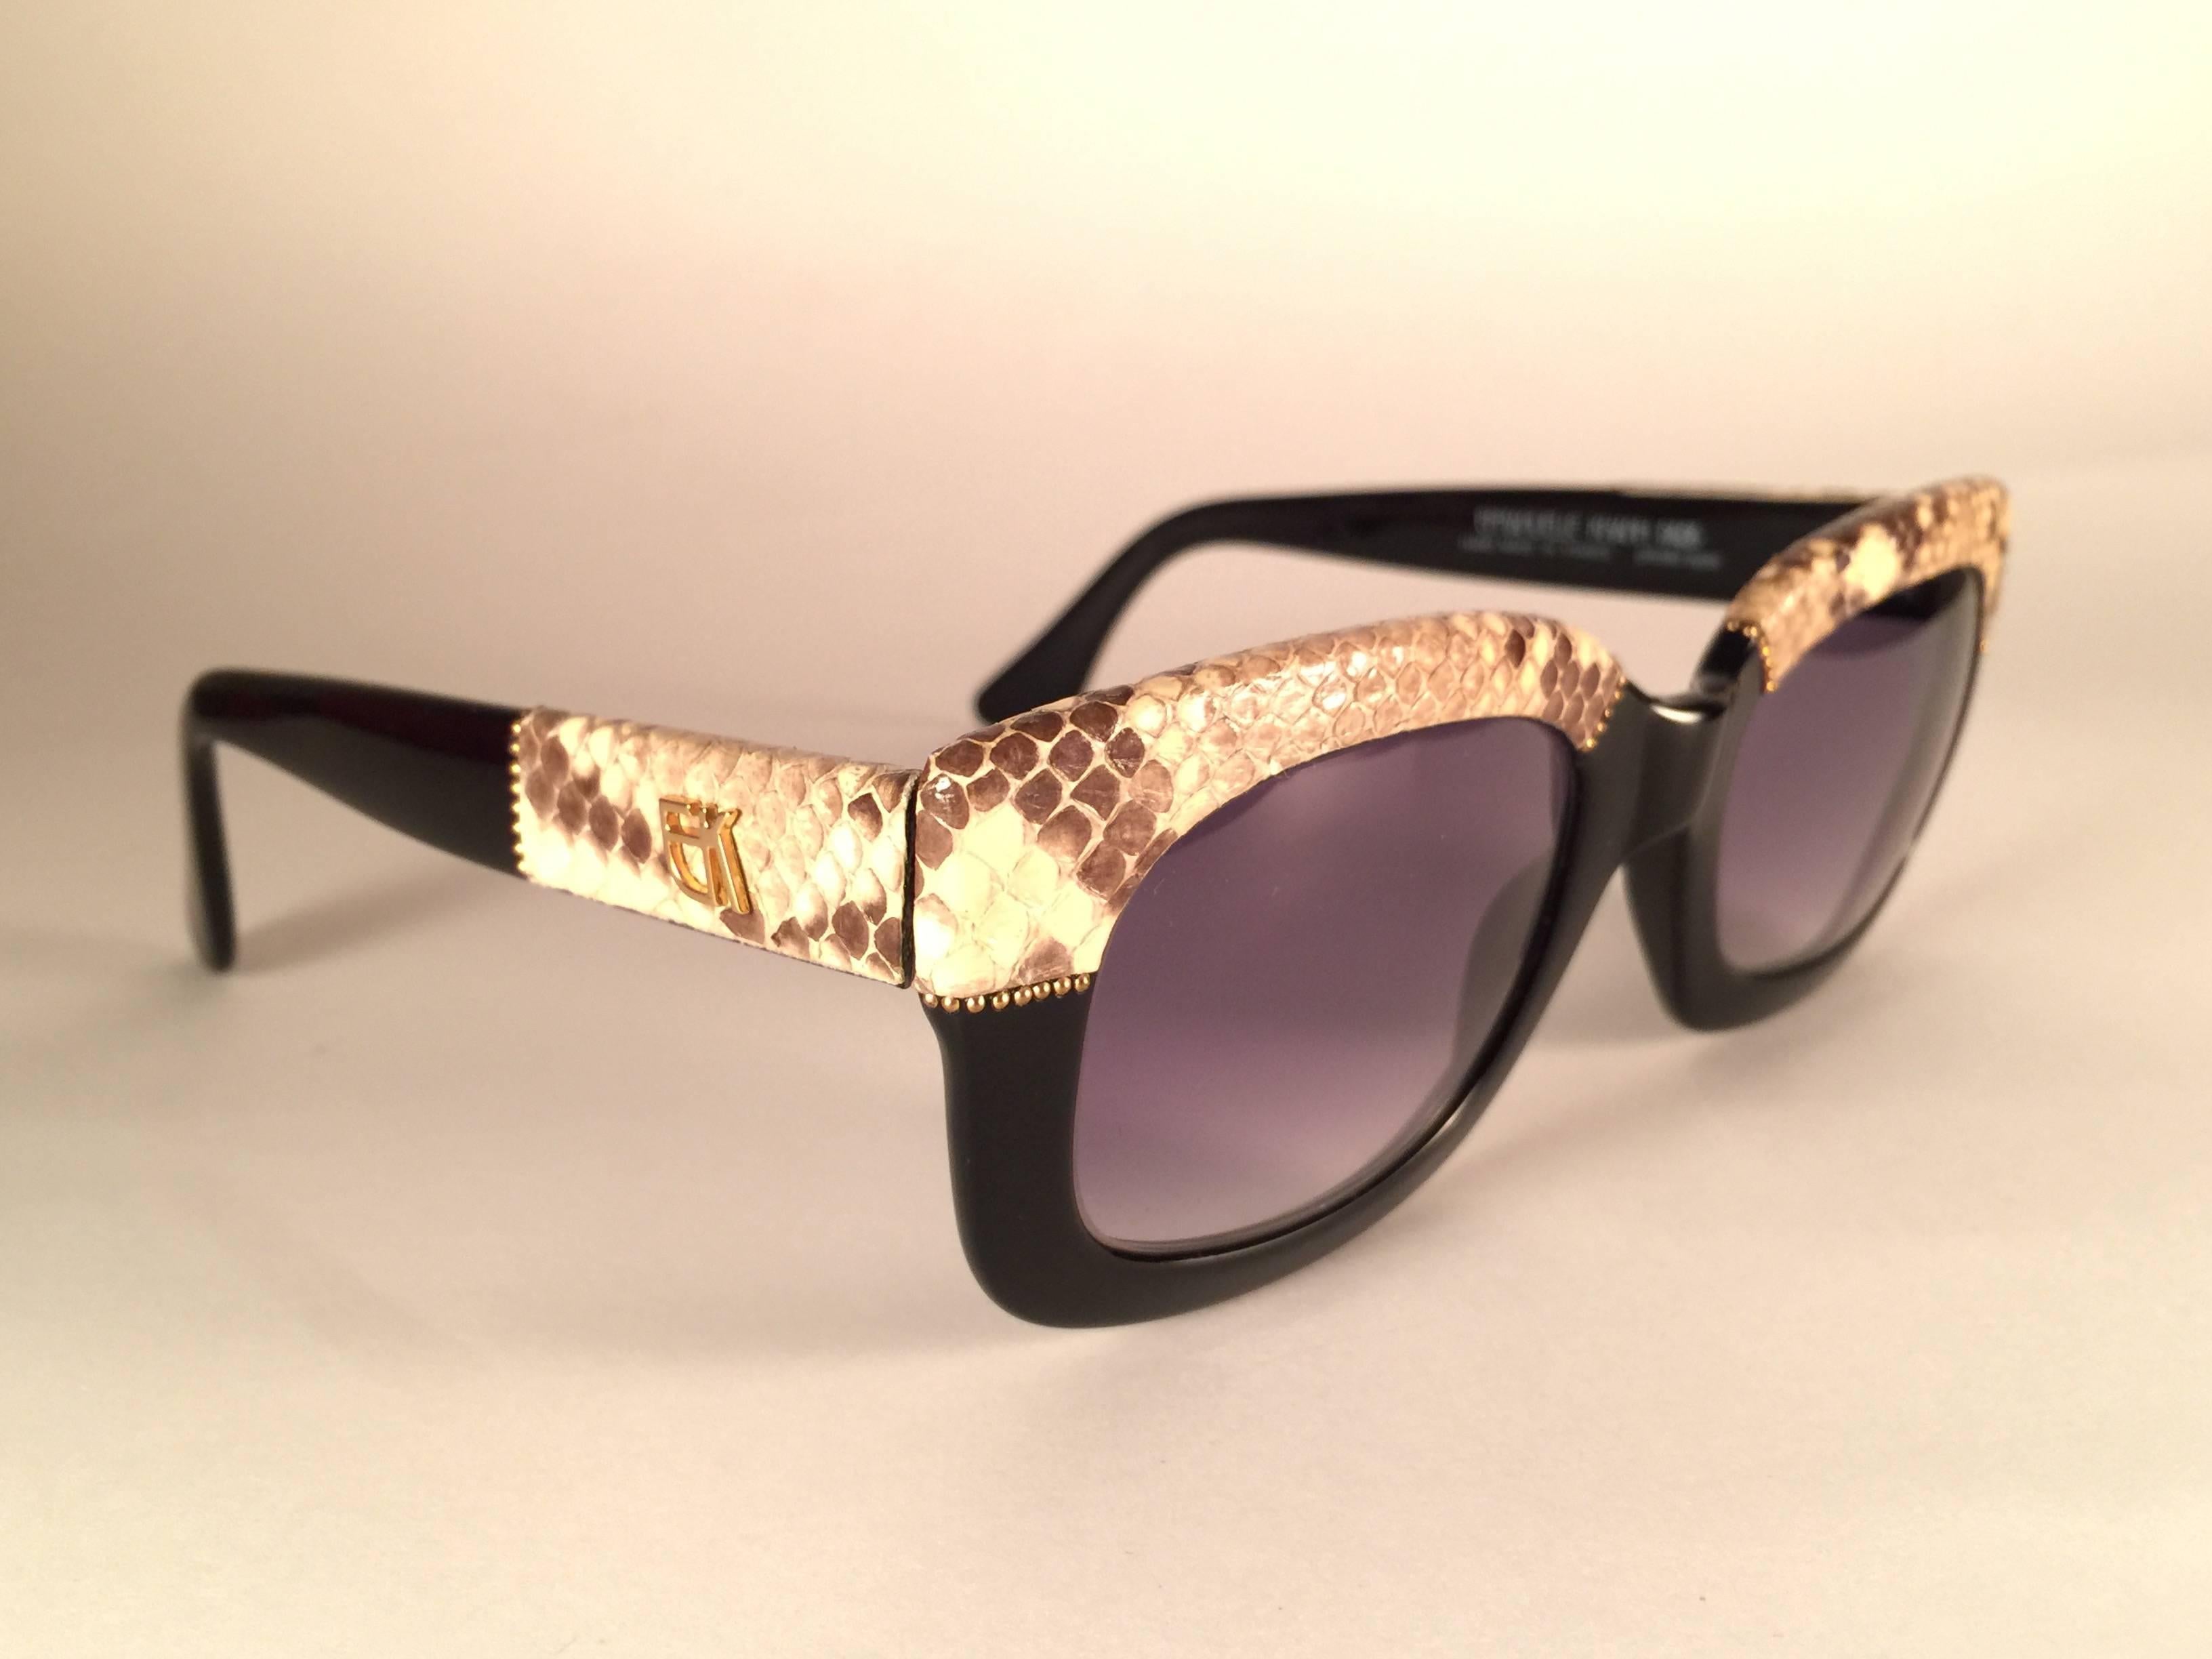 New Vintage Emanuelle Kahn genuine python accents frame with spotless smoke grey gradient lenses. 
Made in Paris. Produced and design in 1980's.  
New, never worn or displayed. Please consider this item is nearly 40 years old and could show minor